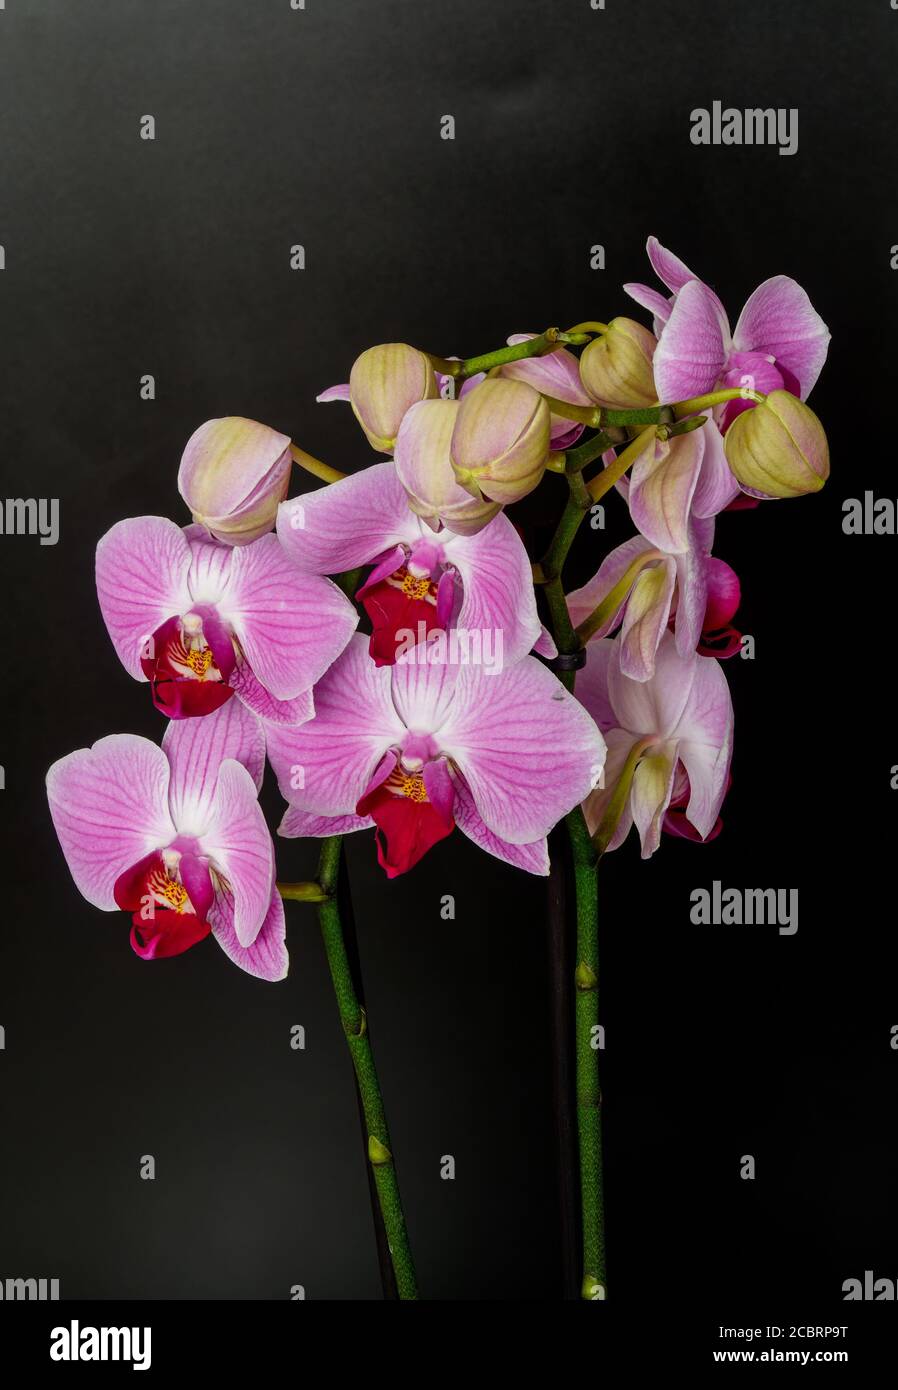 Phalaenopsis orchid on a black background photographed close up, in full bloom flowers and buds Stock Photo